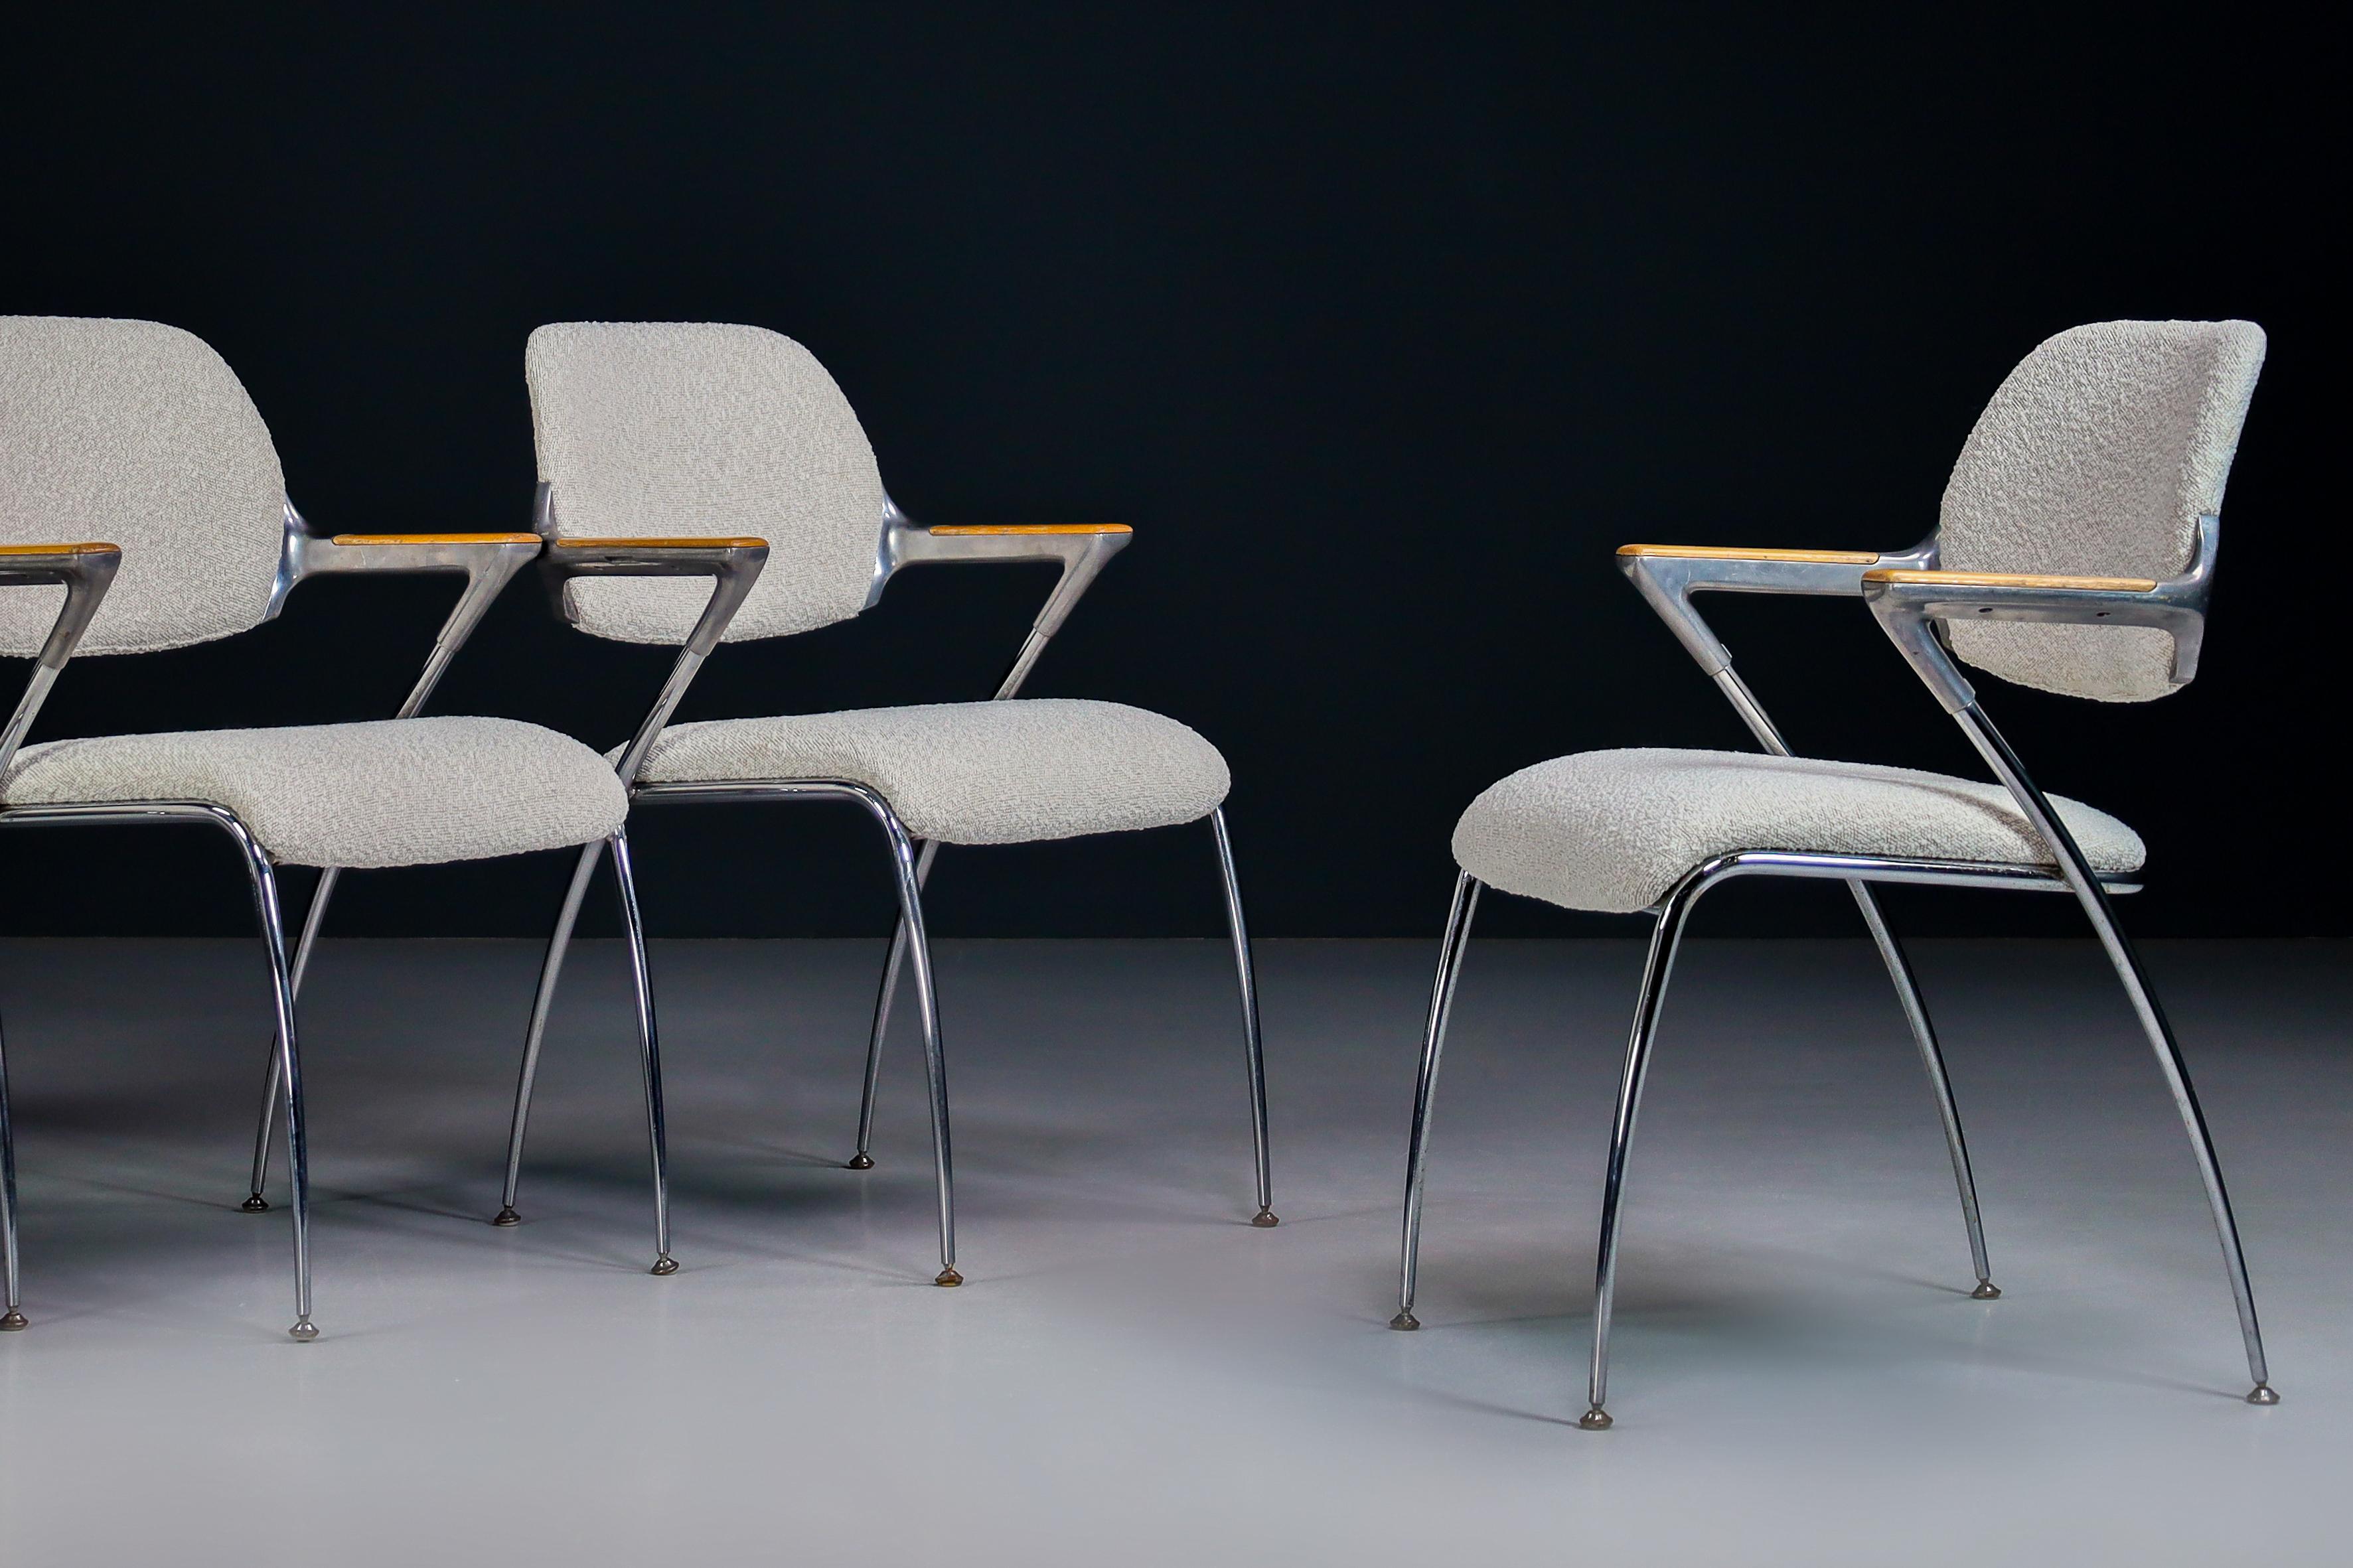 Modern Francesco Zaccone for Thonet Golf Chairs in New Bouclé Upholstery, Germany 1970 For Sale